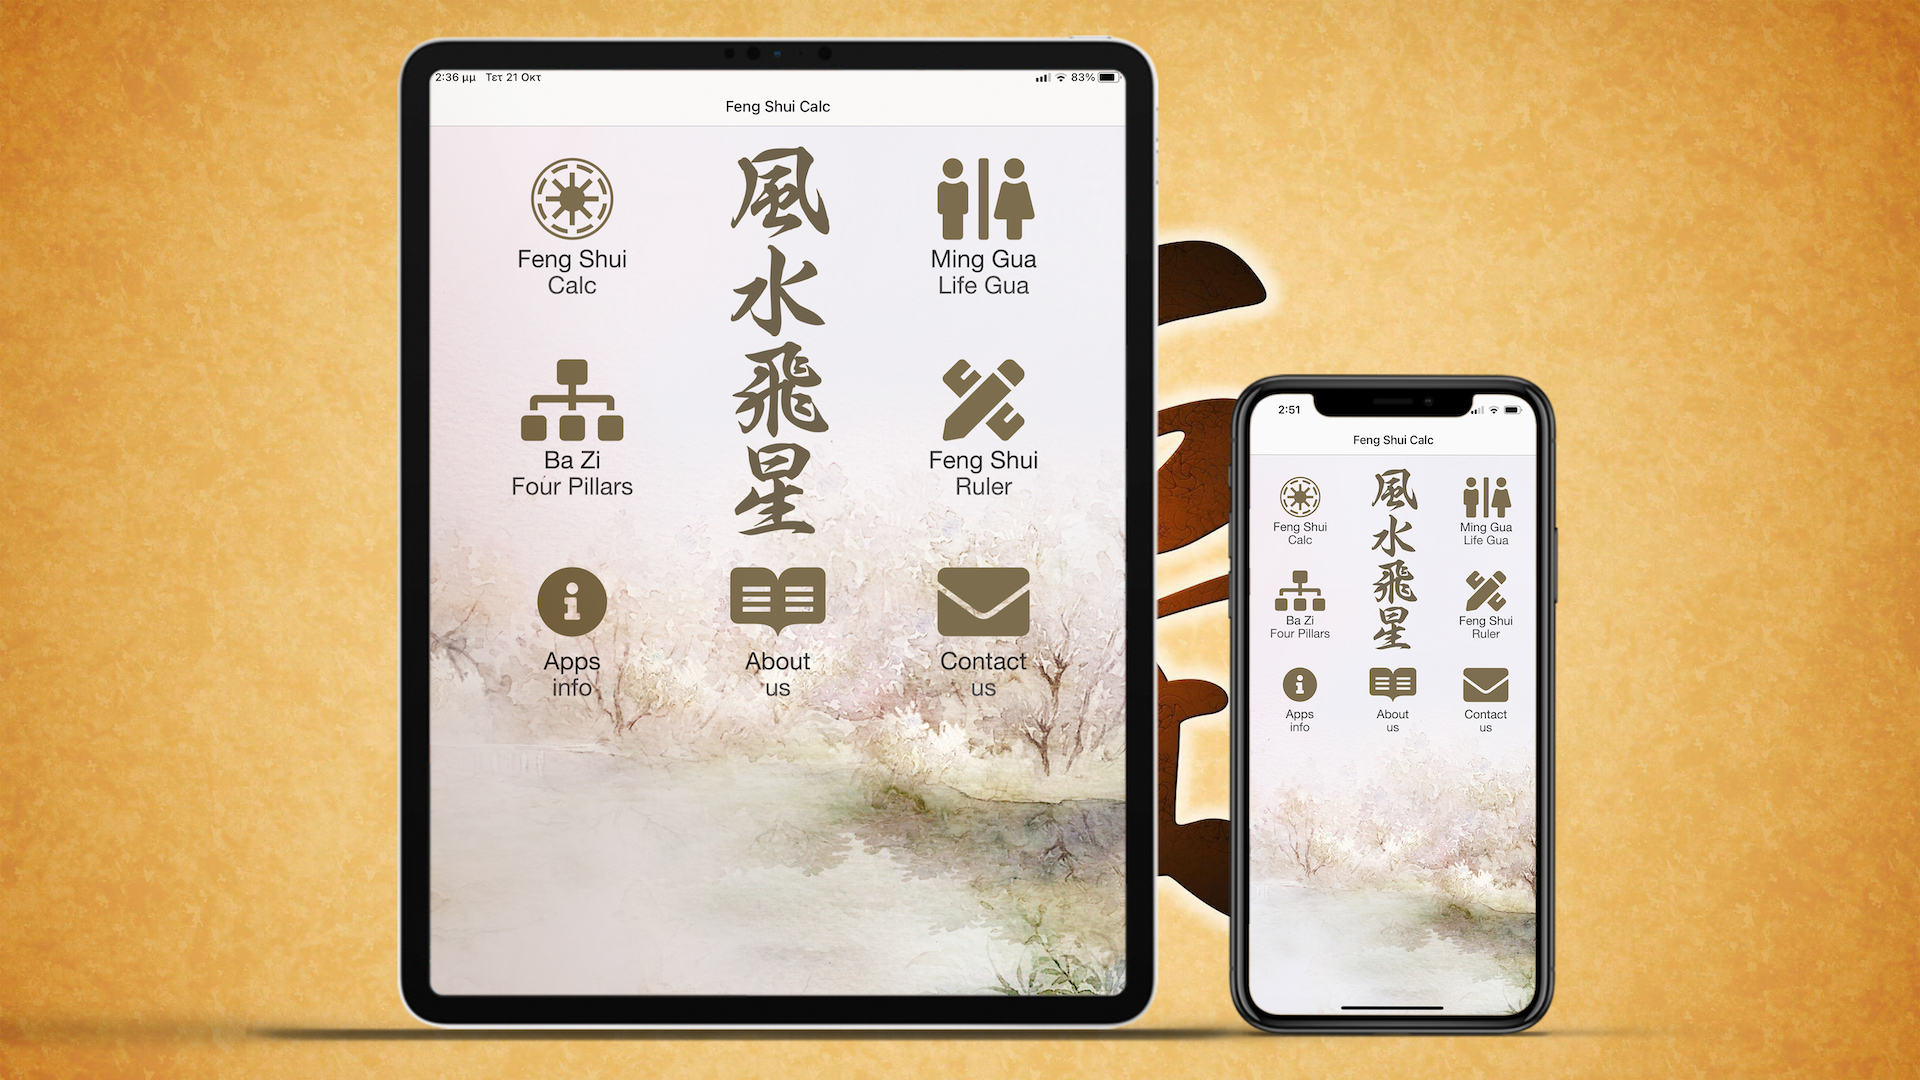 Feng Shui Calc Pro App for iOS Devices